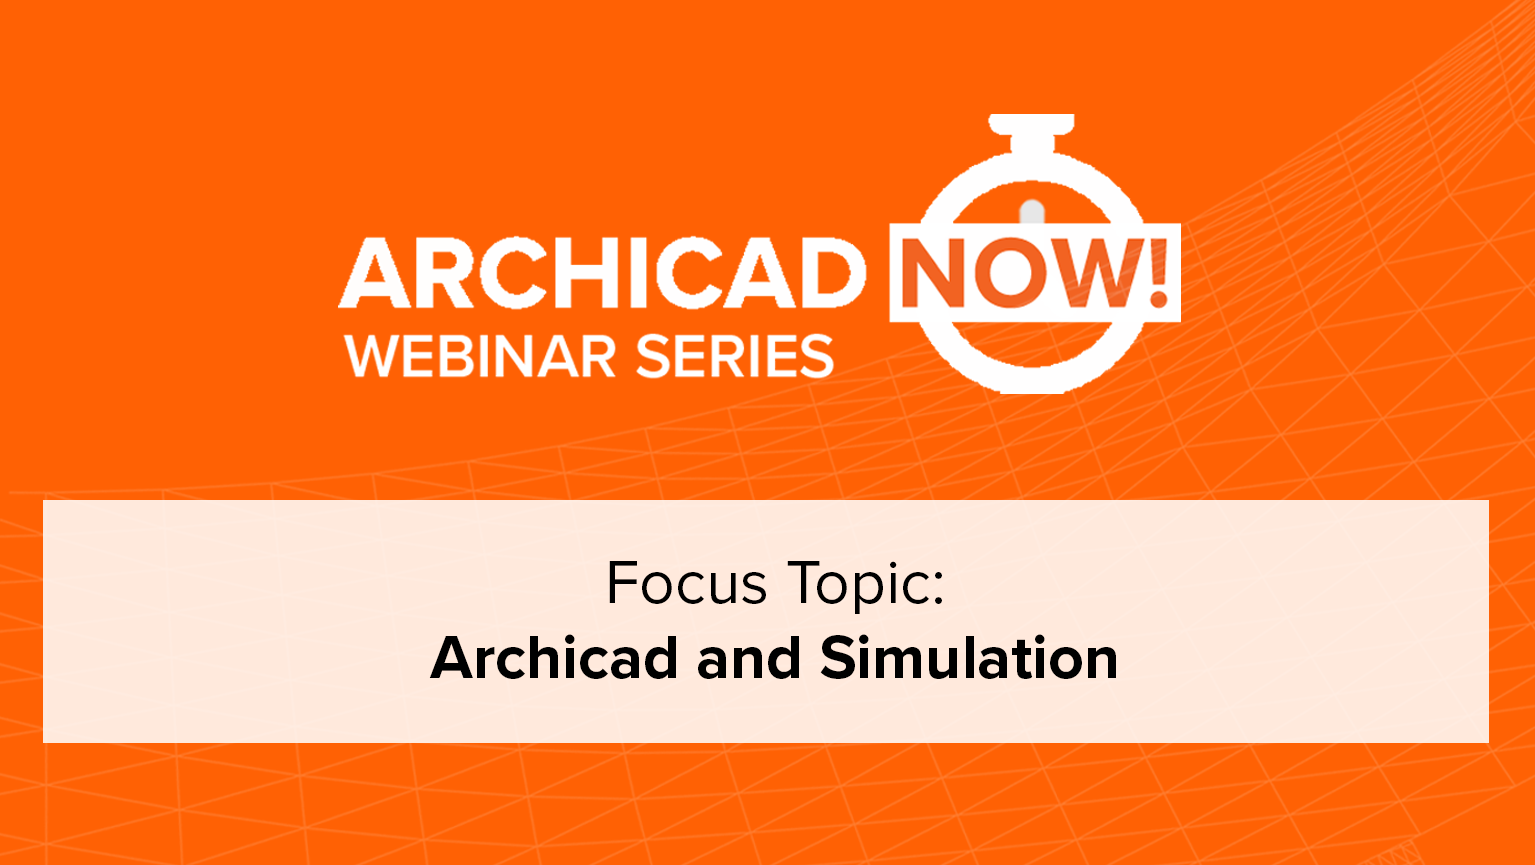 Archicad Now! Webinar Series: Archicad and Simulation